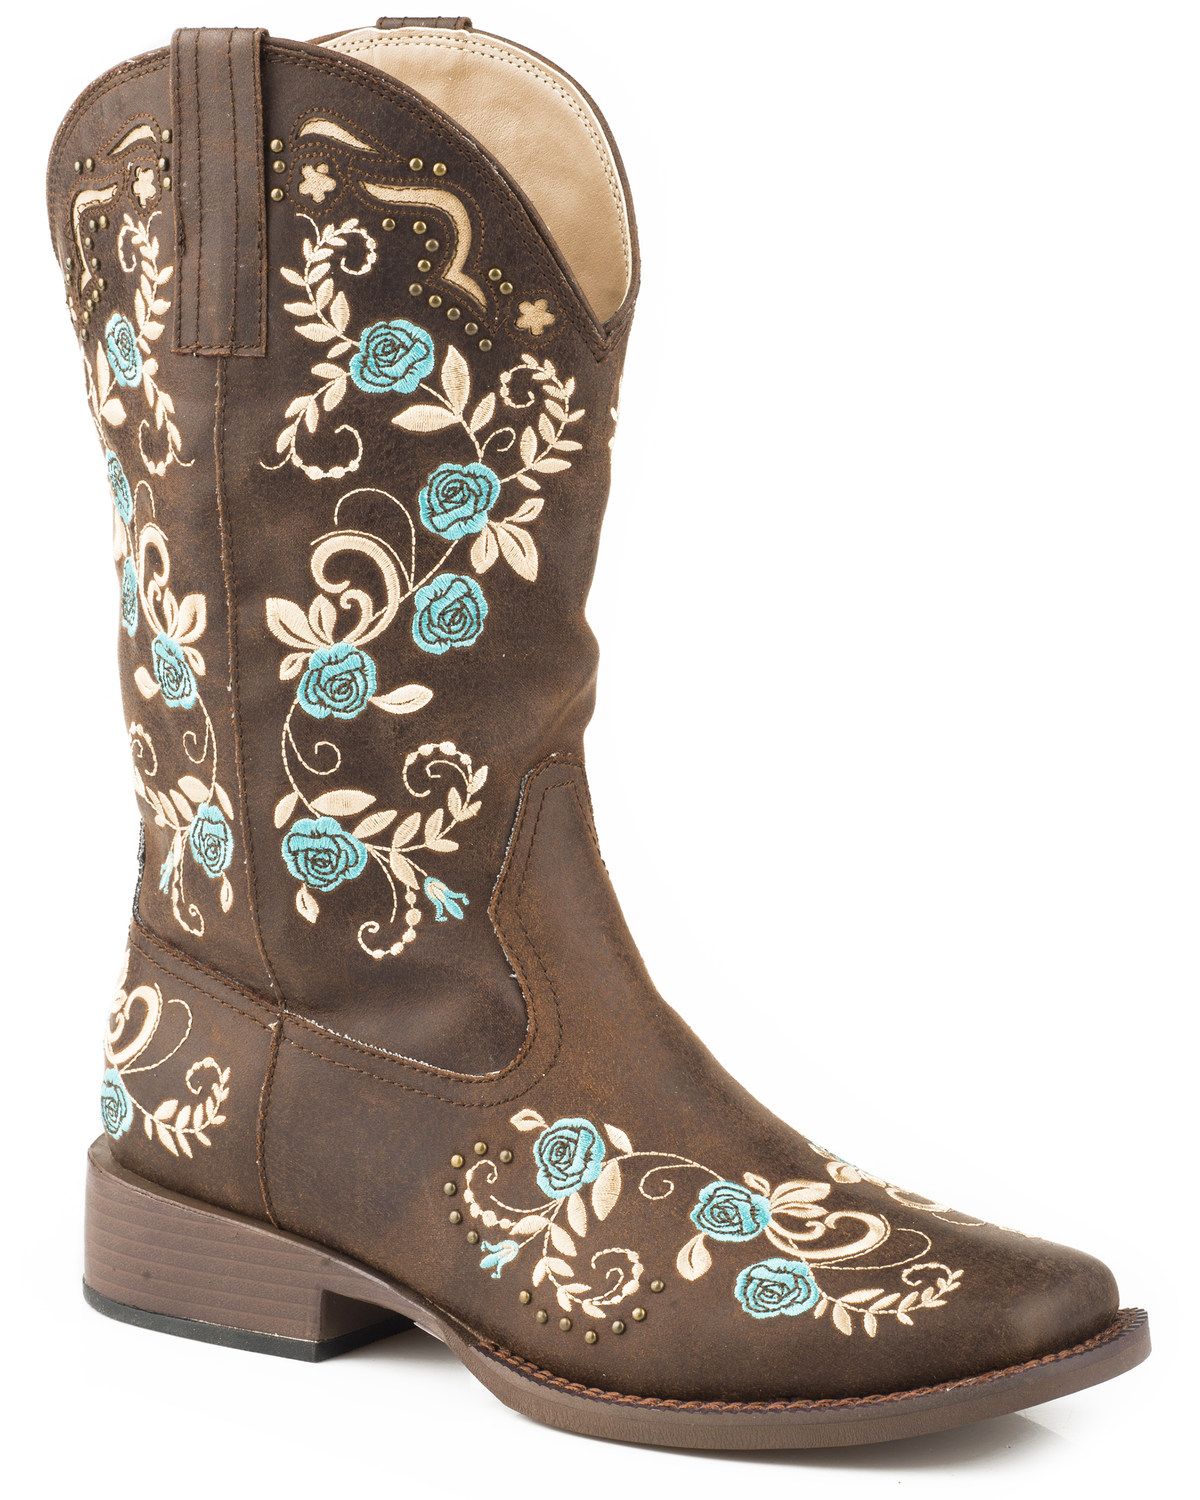 Details about   Womens New Fashion Floral Embroidered Square Toe Western Cowyboy Boots Shoes 584